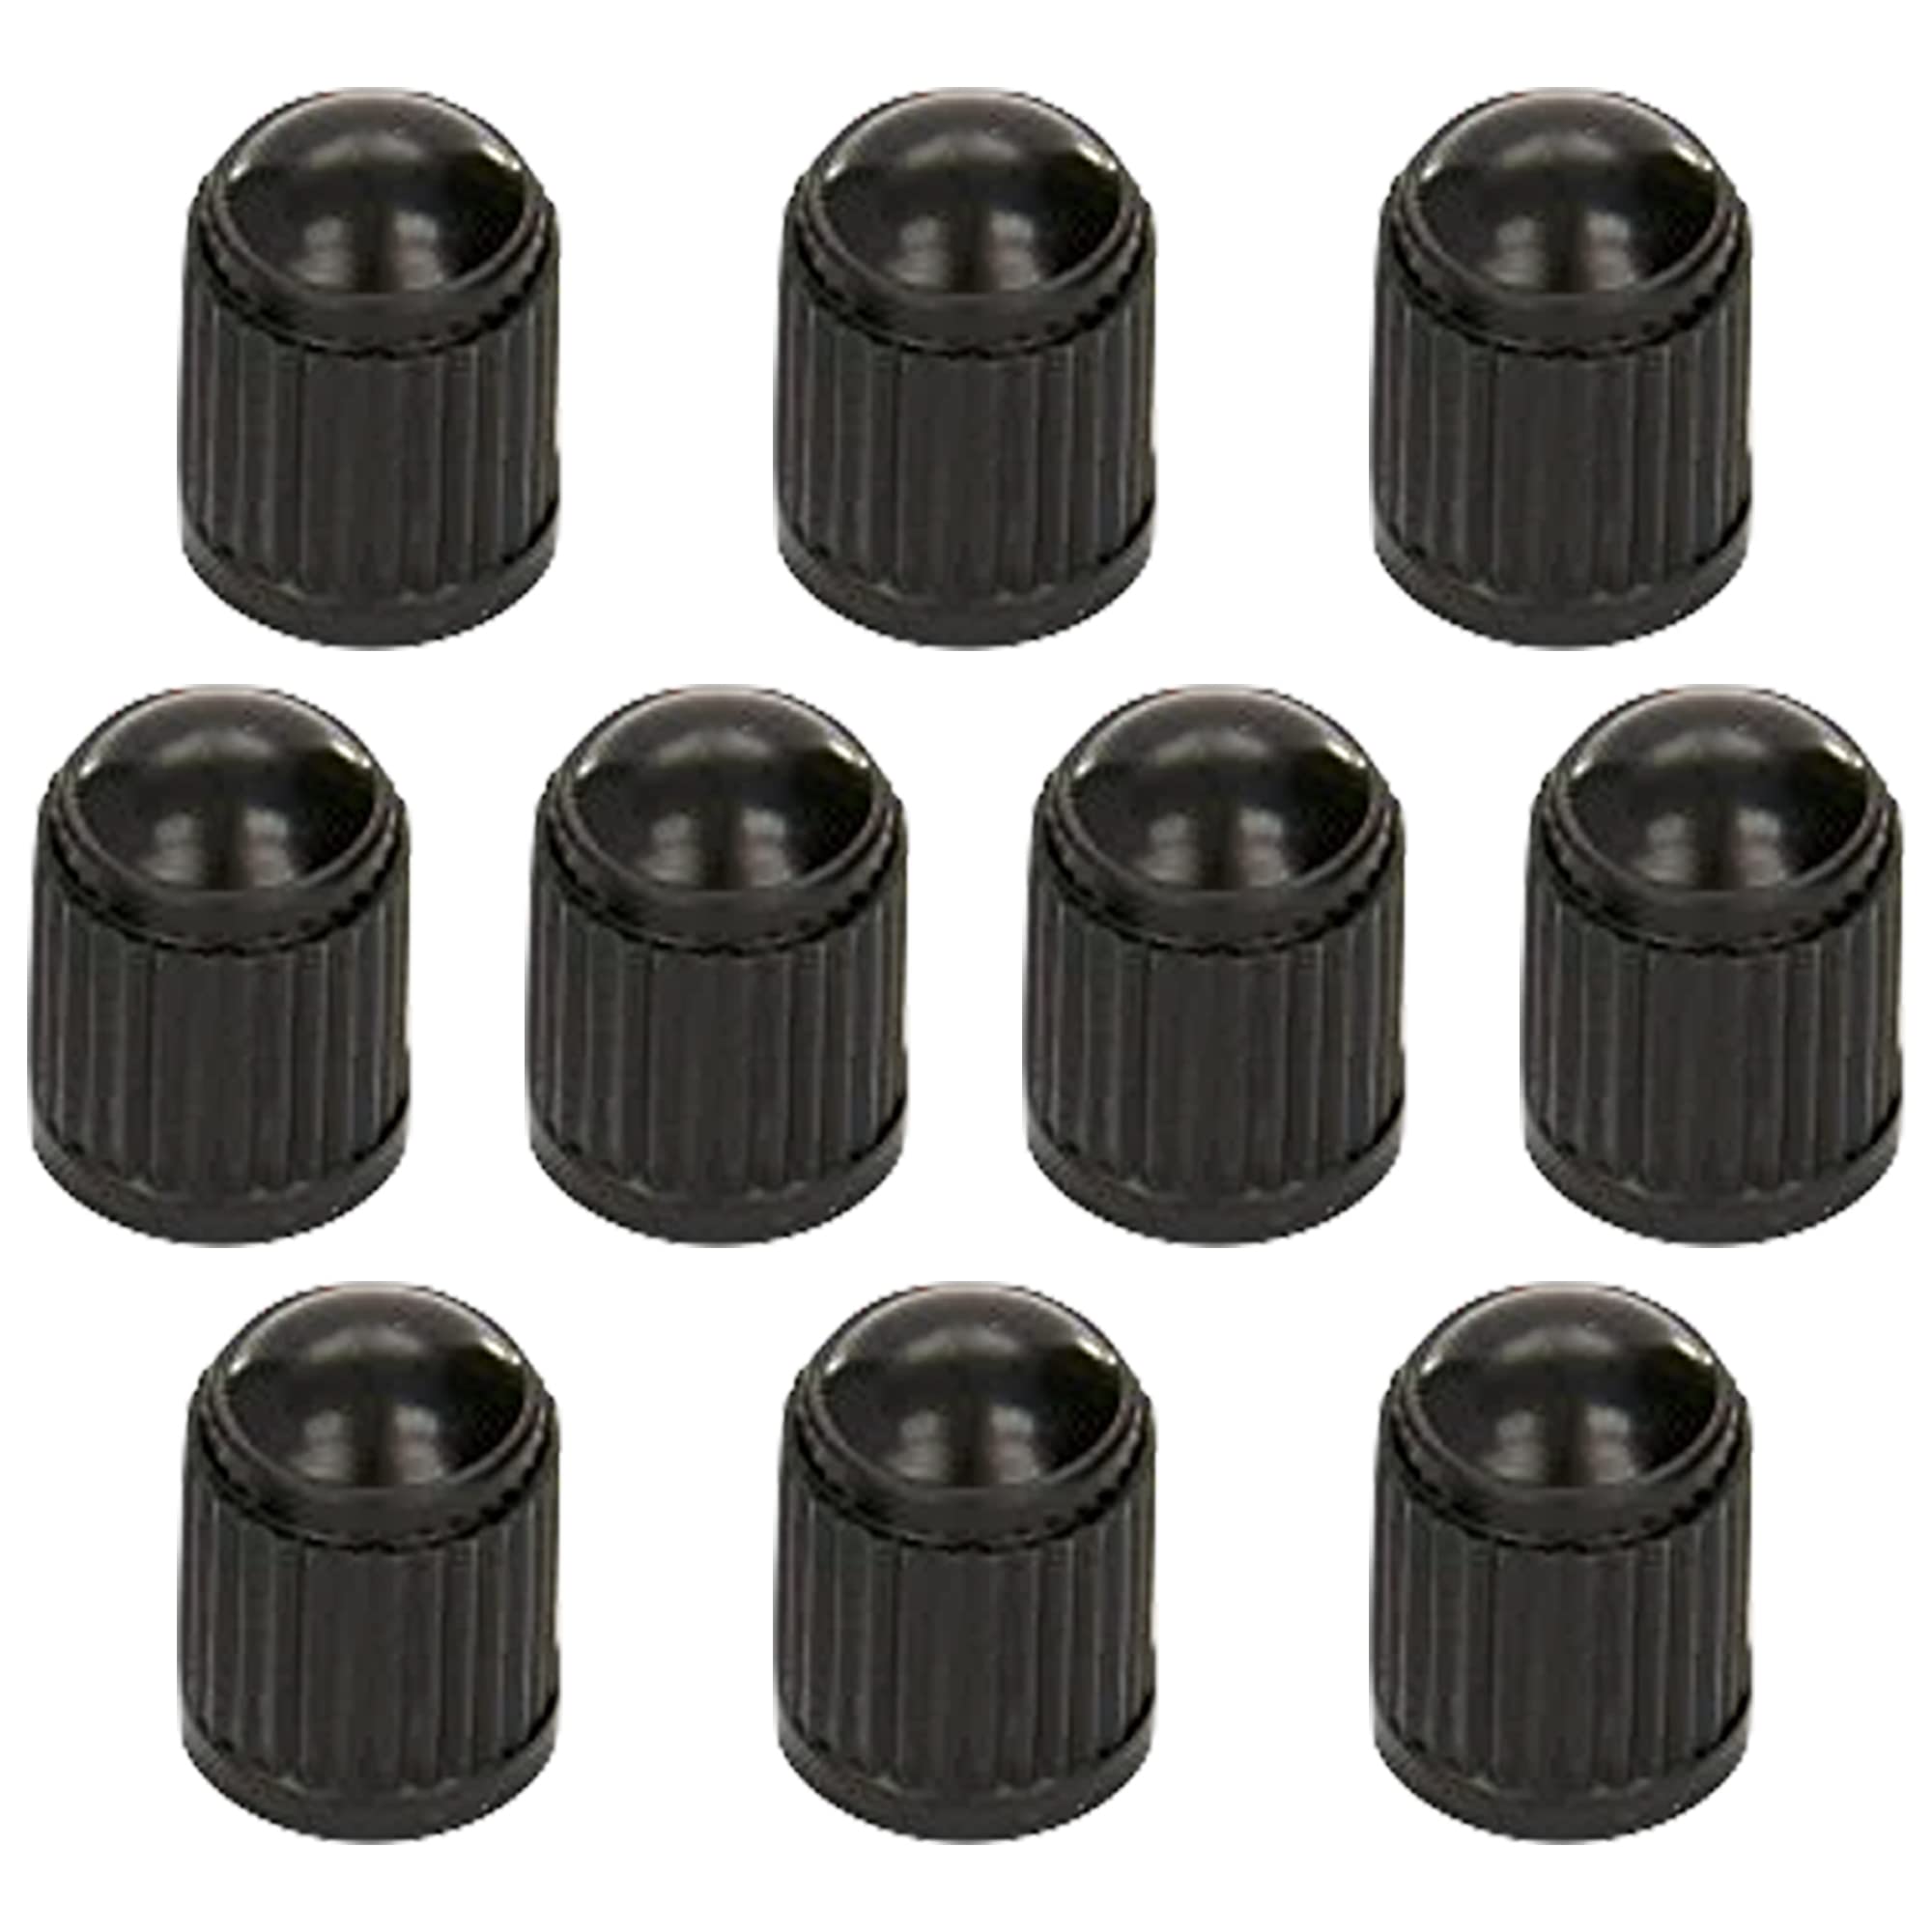 10pcs Tyre Valve Cap/Plastic Dust Caps/Cover Black for Universal fit Schrader Valves commonly used on Car Tyres, Bikes, Bicycles, Motorbikes Prams and Wheelbarrows by Stocc (10 Valve Caps) - Ammpoure Wellbeing